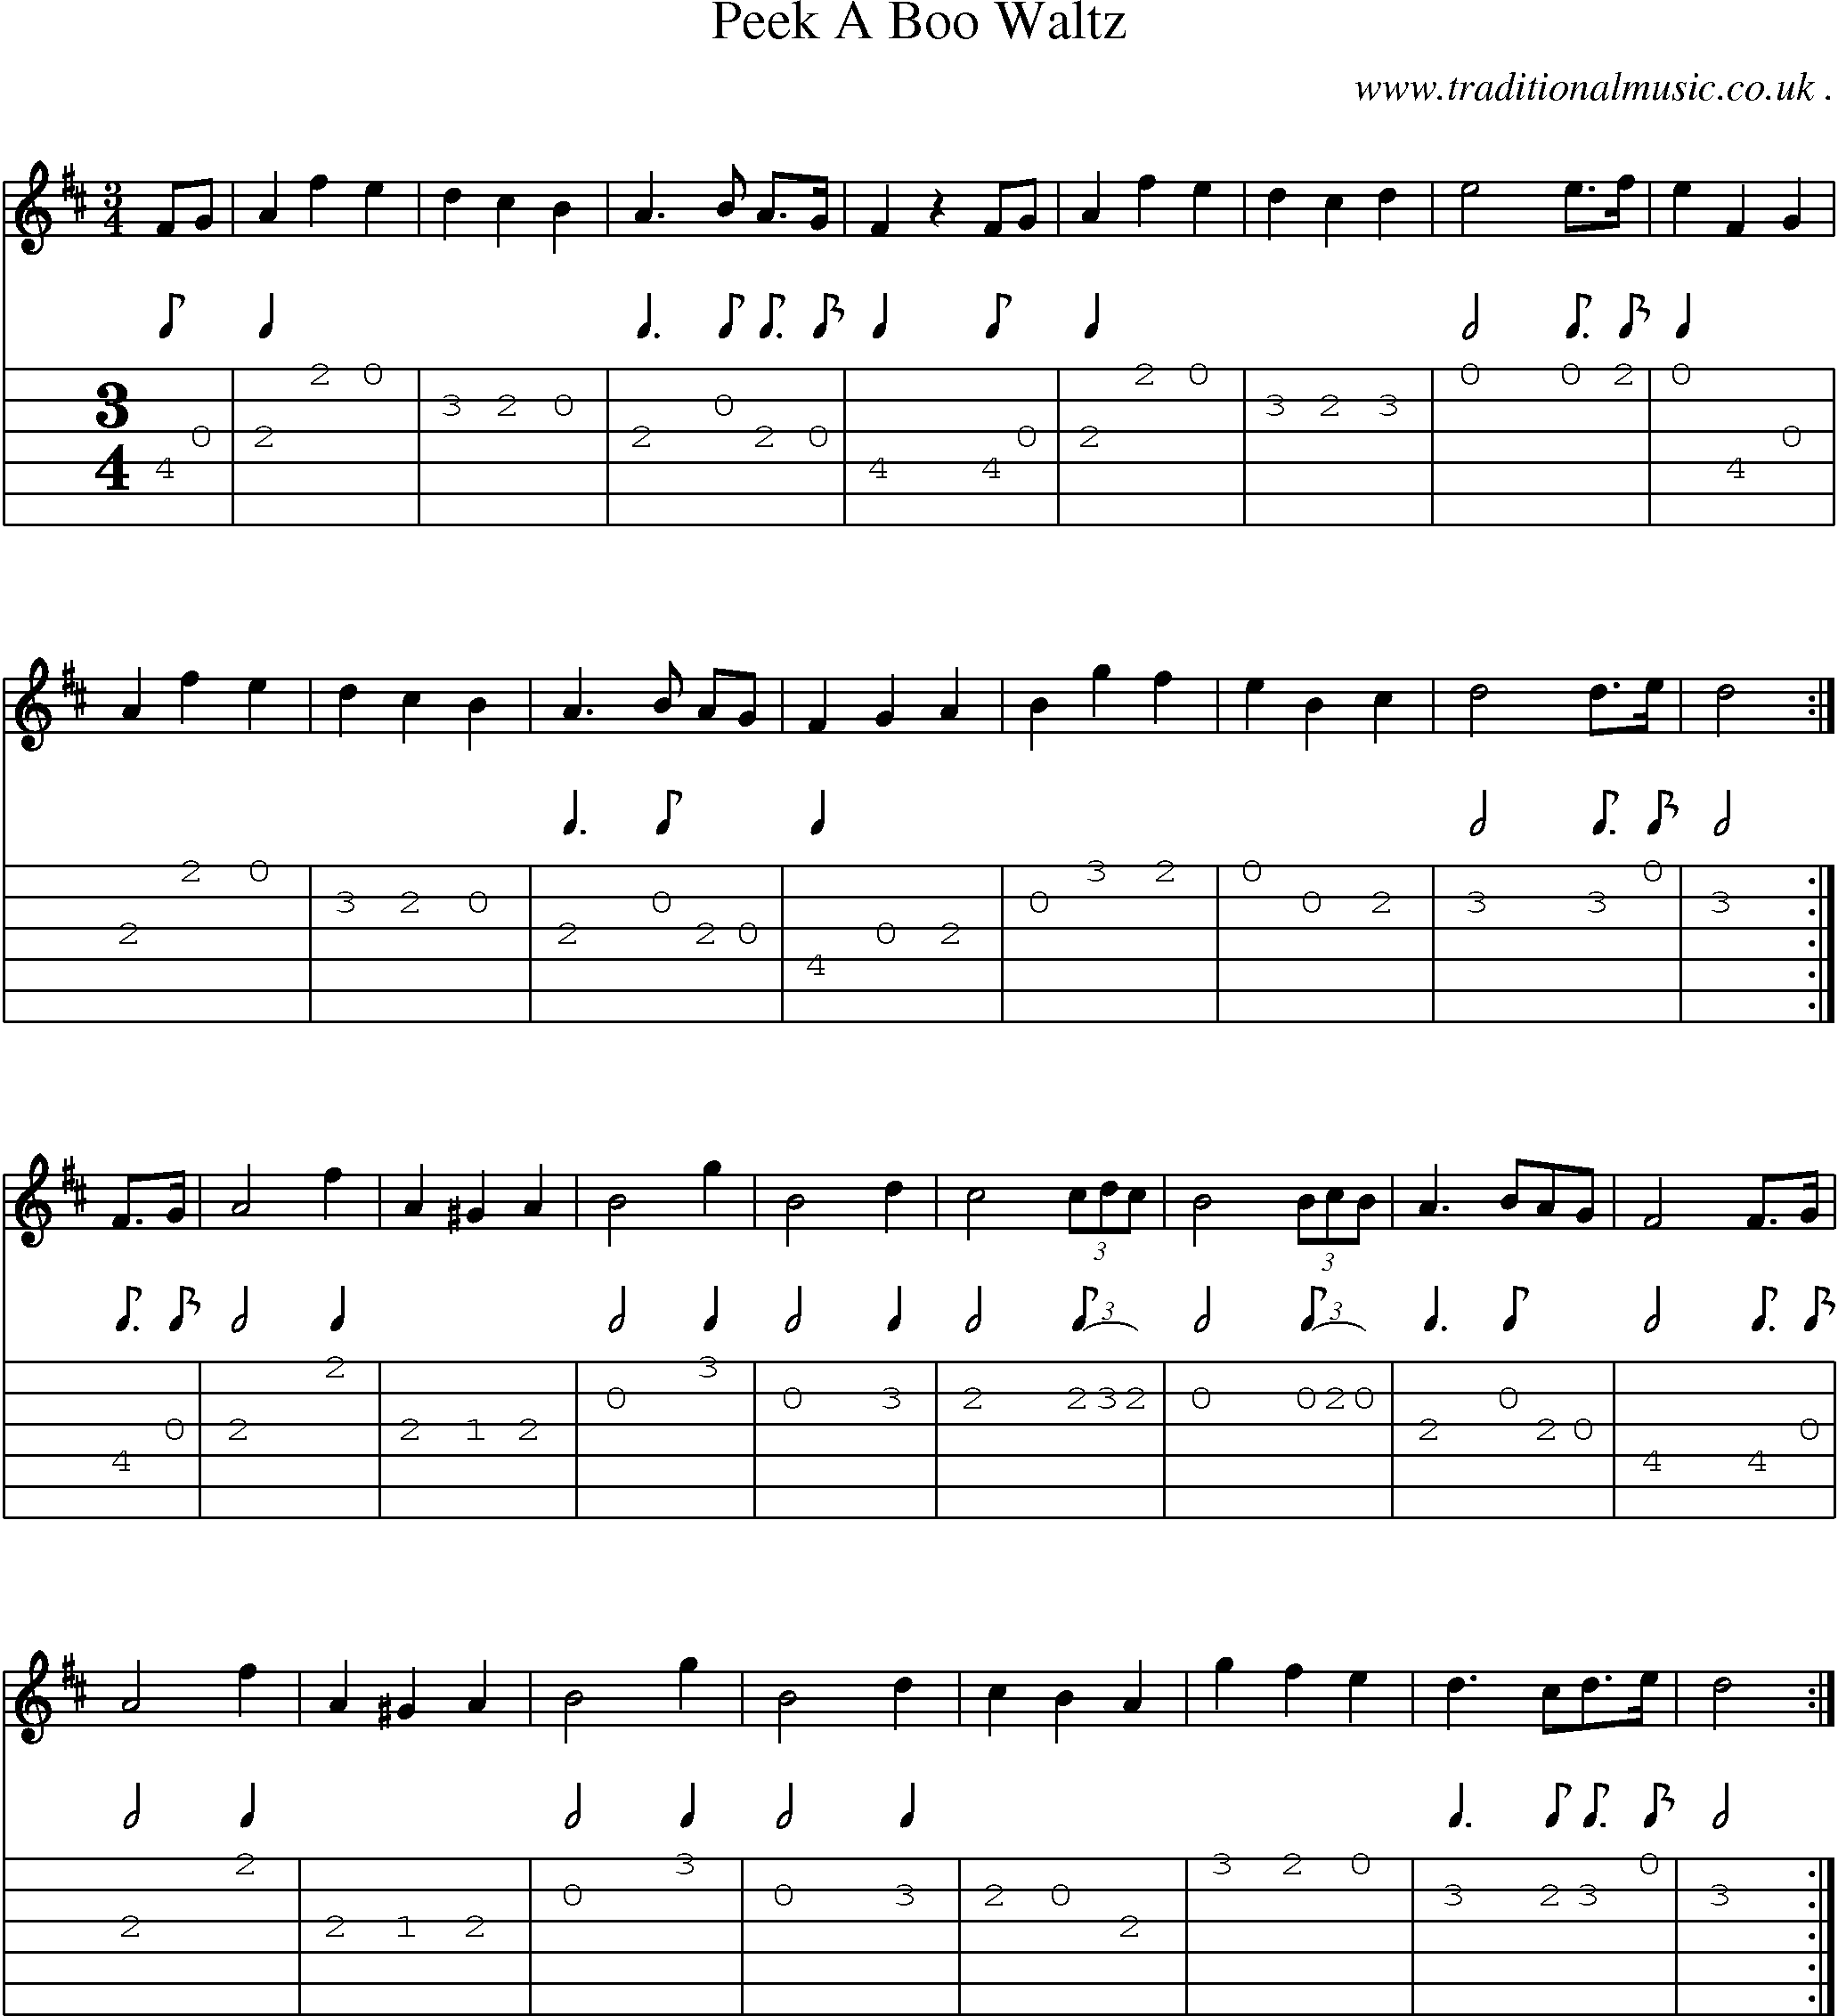 Music Score and Guitar Tabs for Peek A Boo Waltz